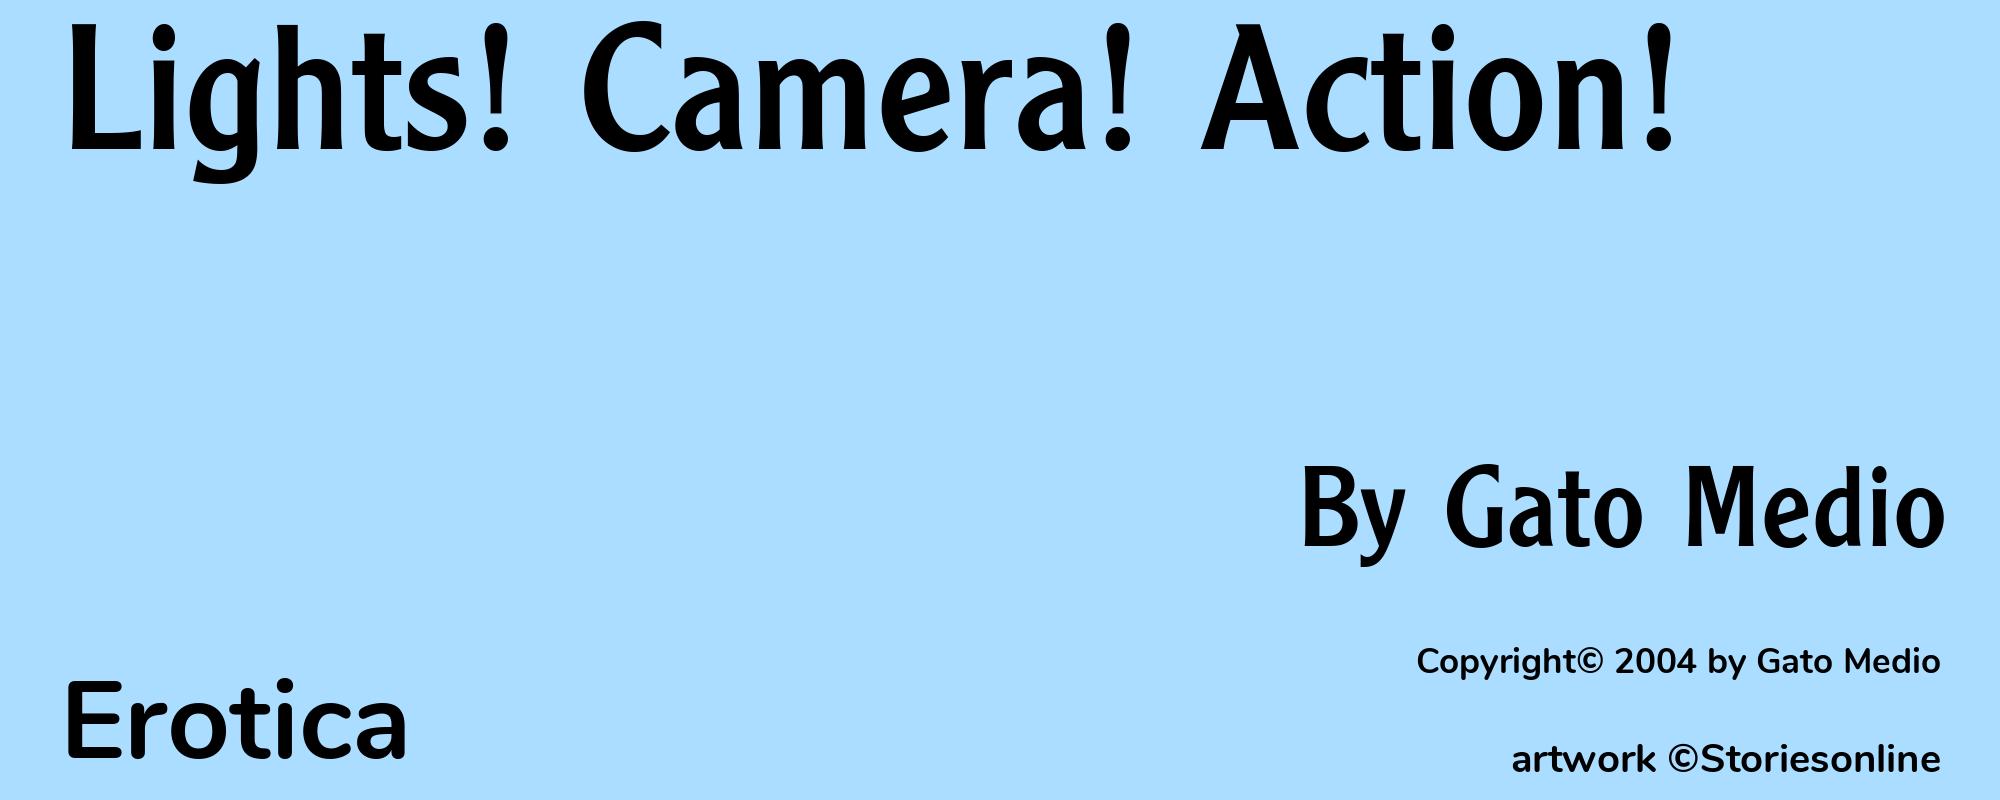 Lights! Camera! Action! - Cover